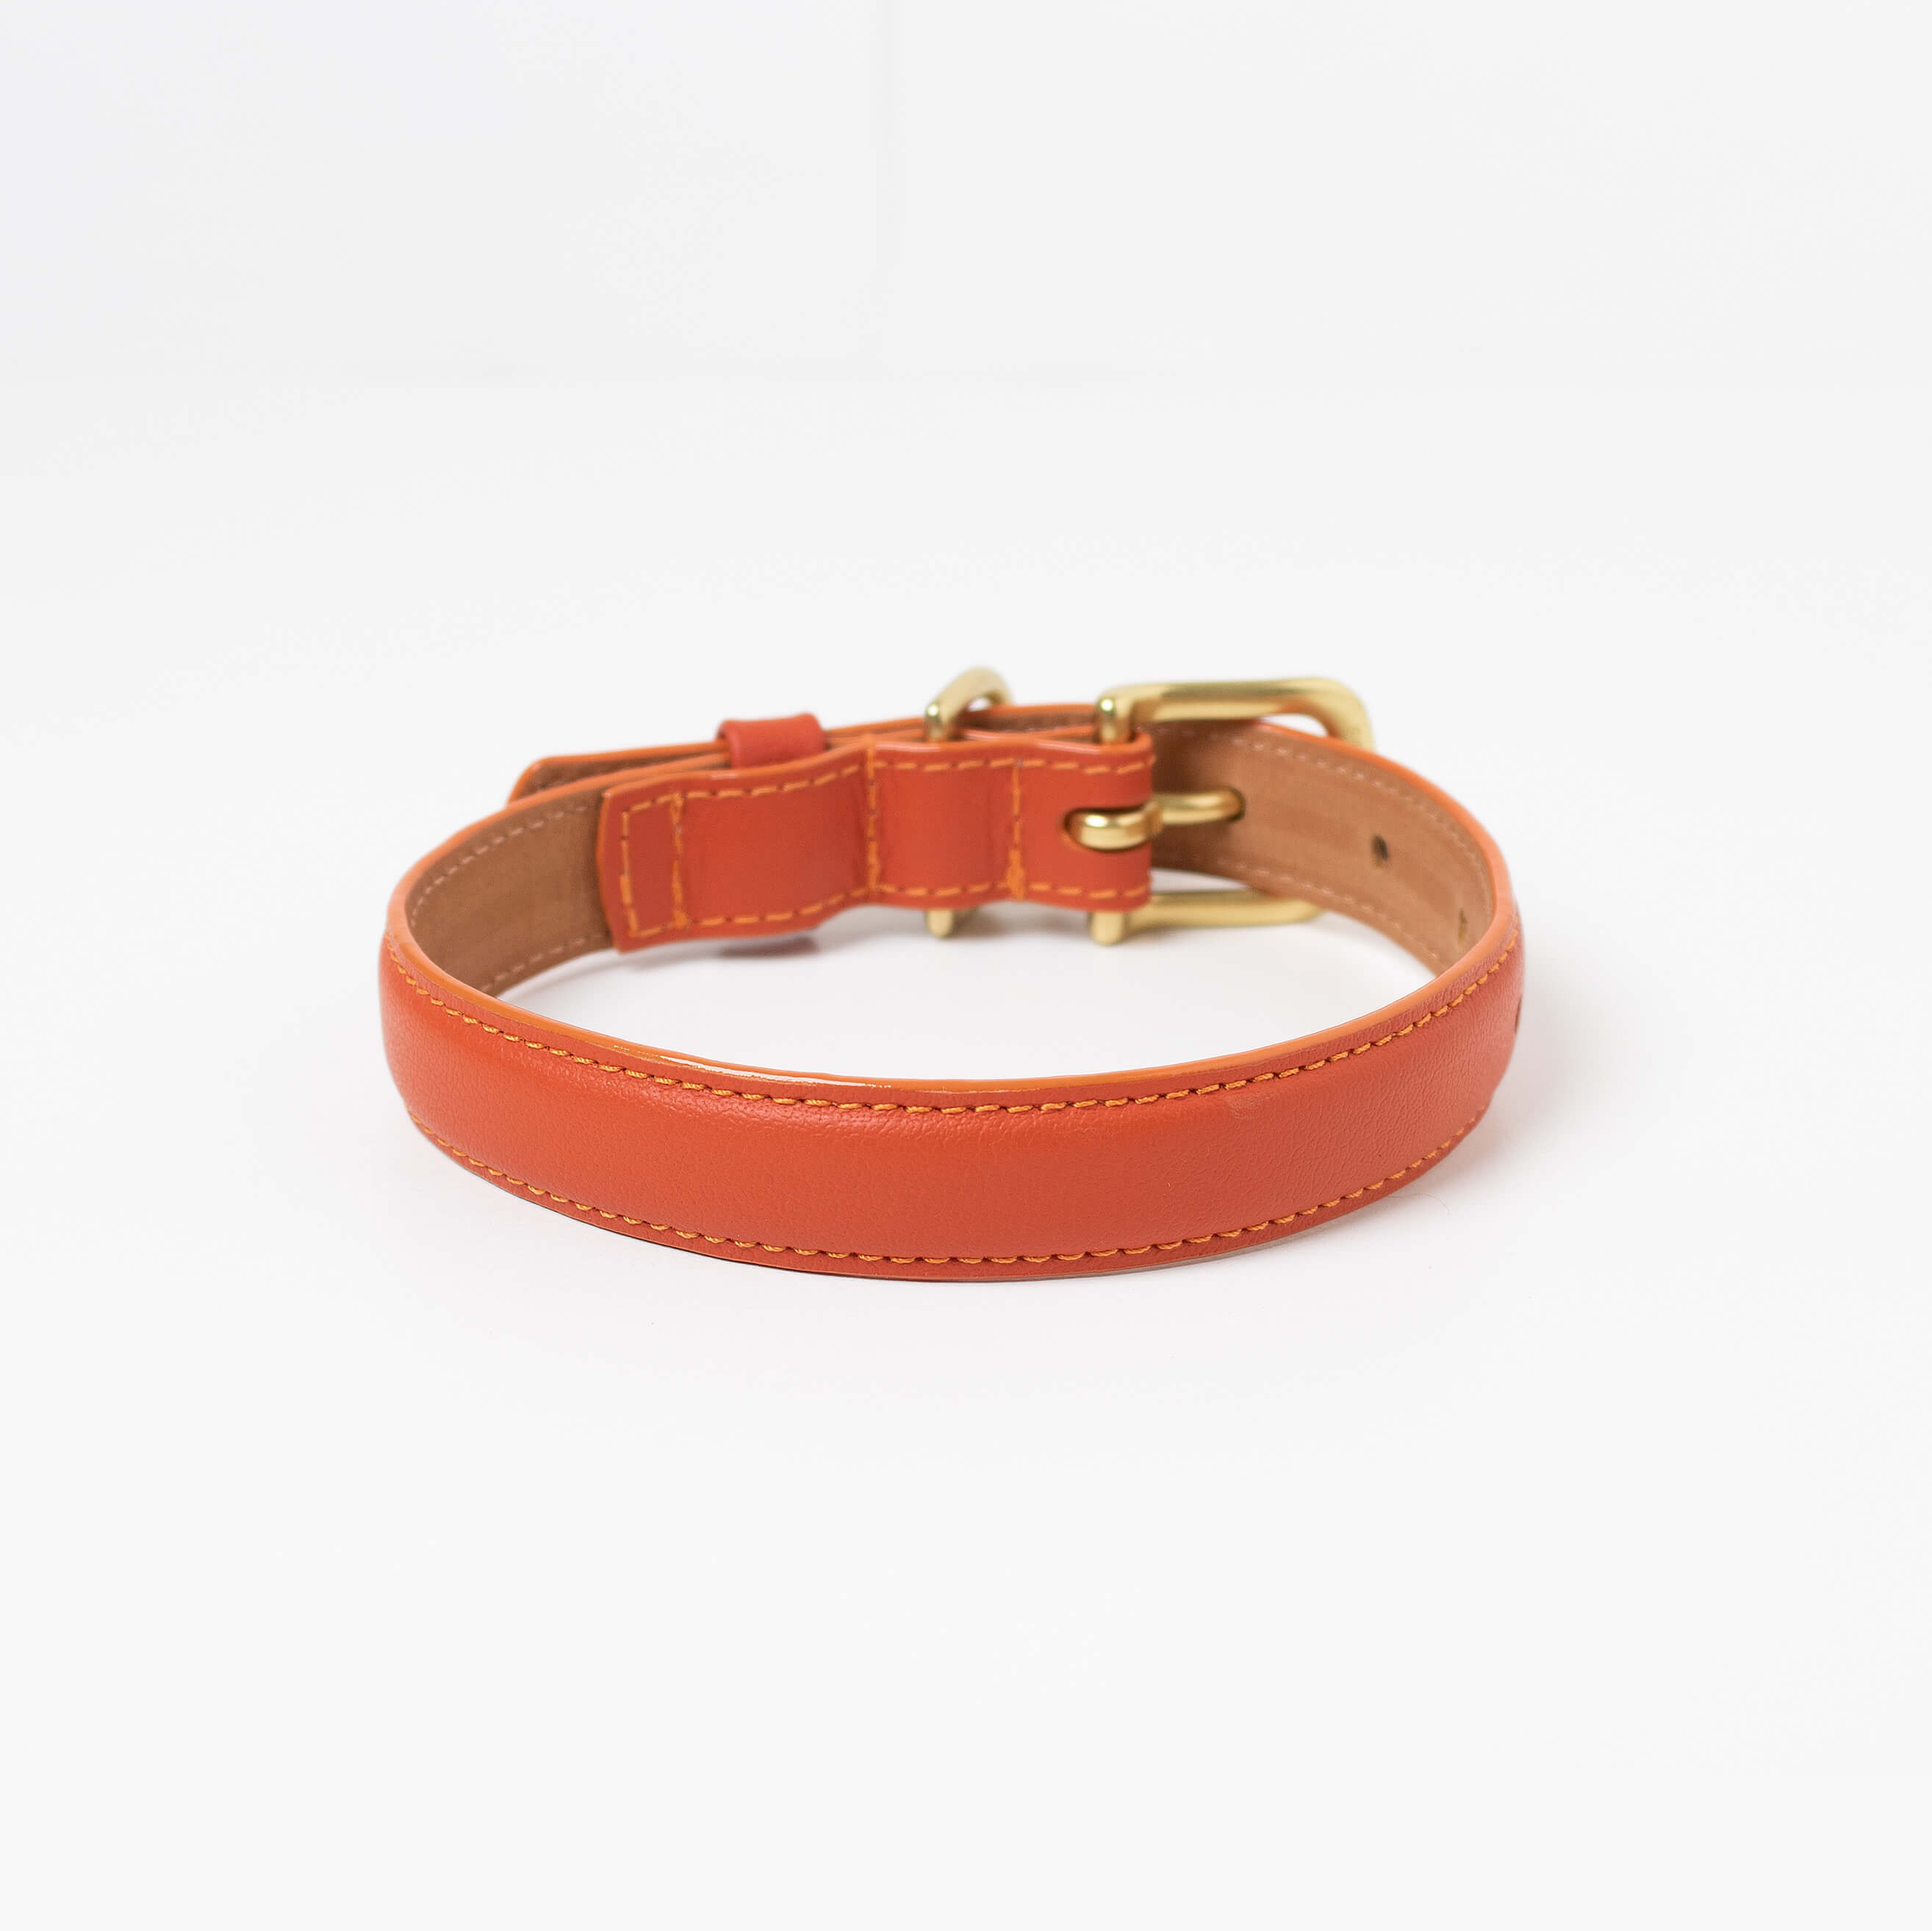 Orange leather dog collar with with brass hardware and tag ID. Luxury dog collar.